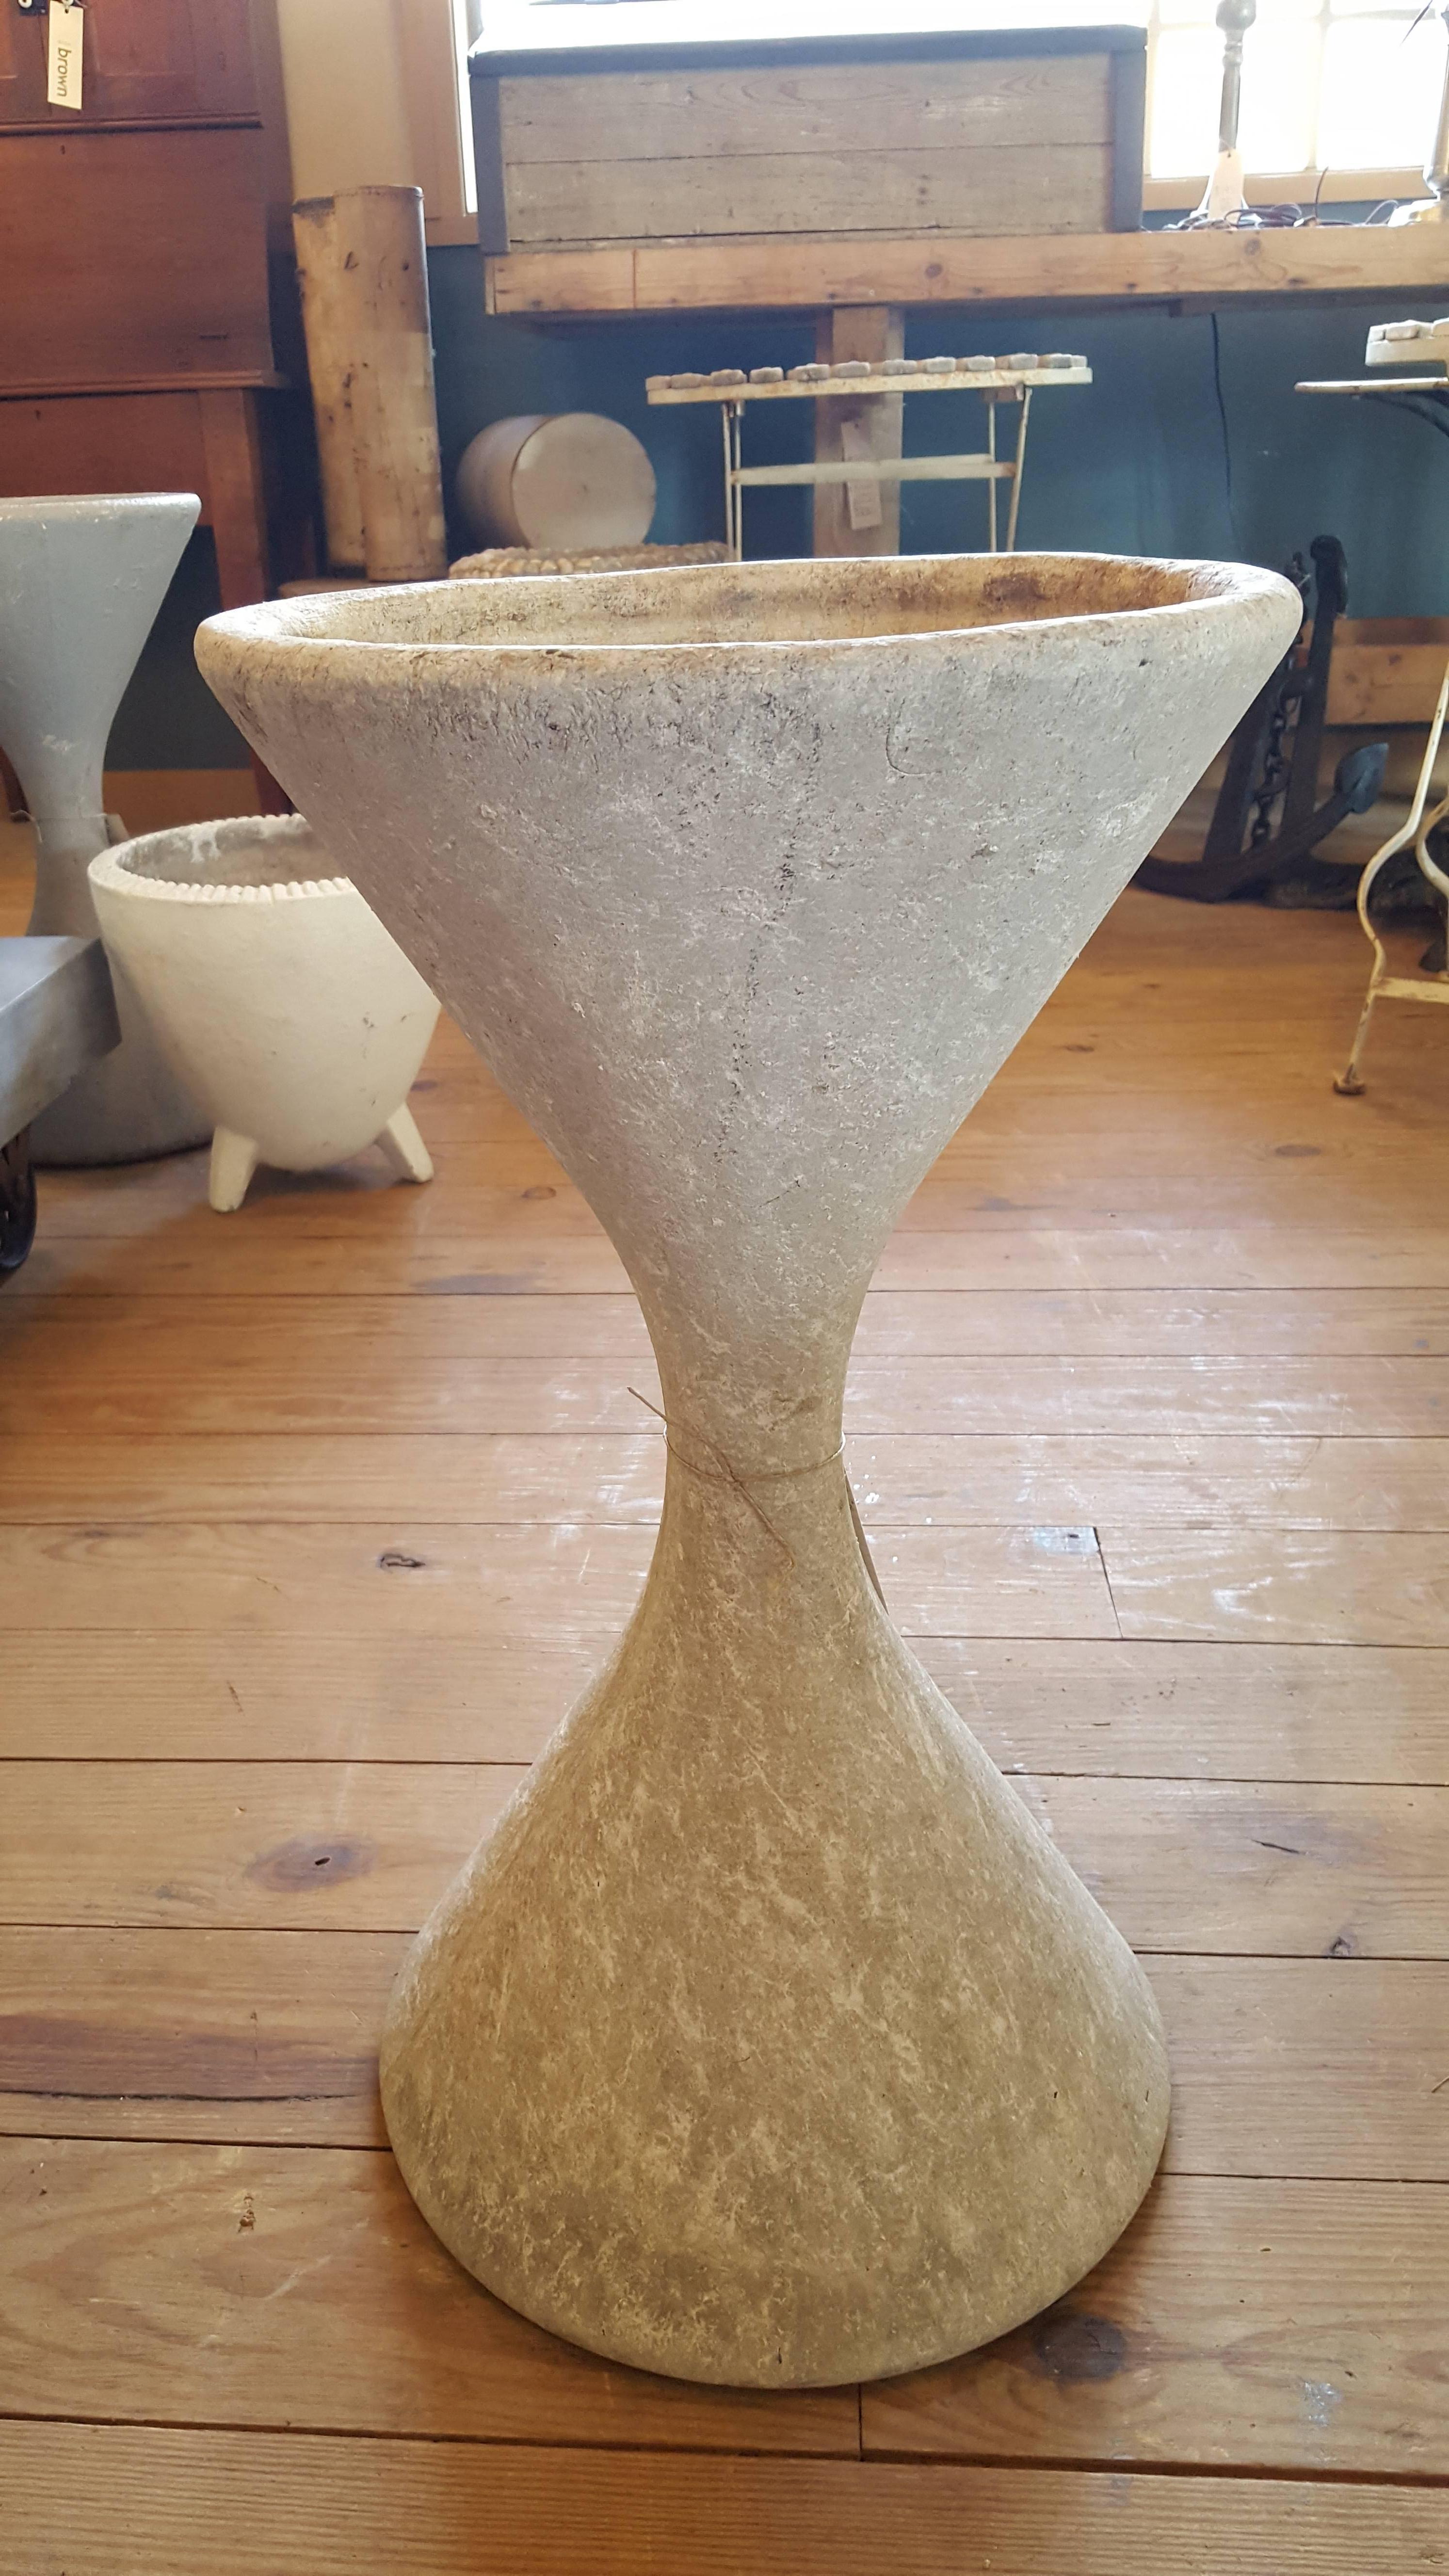 Wonderful vintage Willy Guhl spindle or diablo style planter from Swiss company Eternit Ag, circa 1950s. Has dappled, weathered coloring and is constructed of fiber cement. Great Mid-Century Modern hourglass geometric design. This planter features